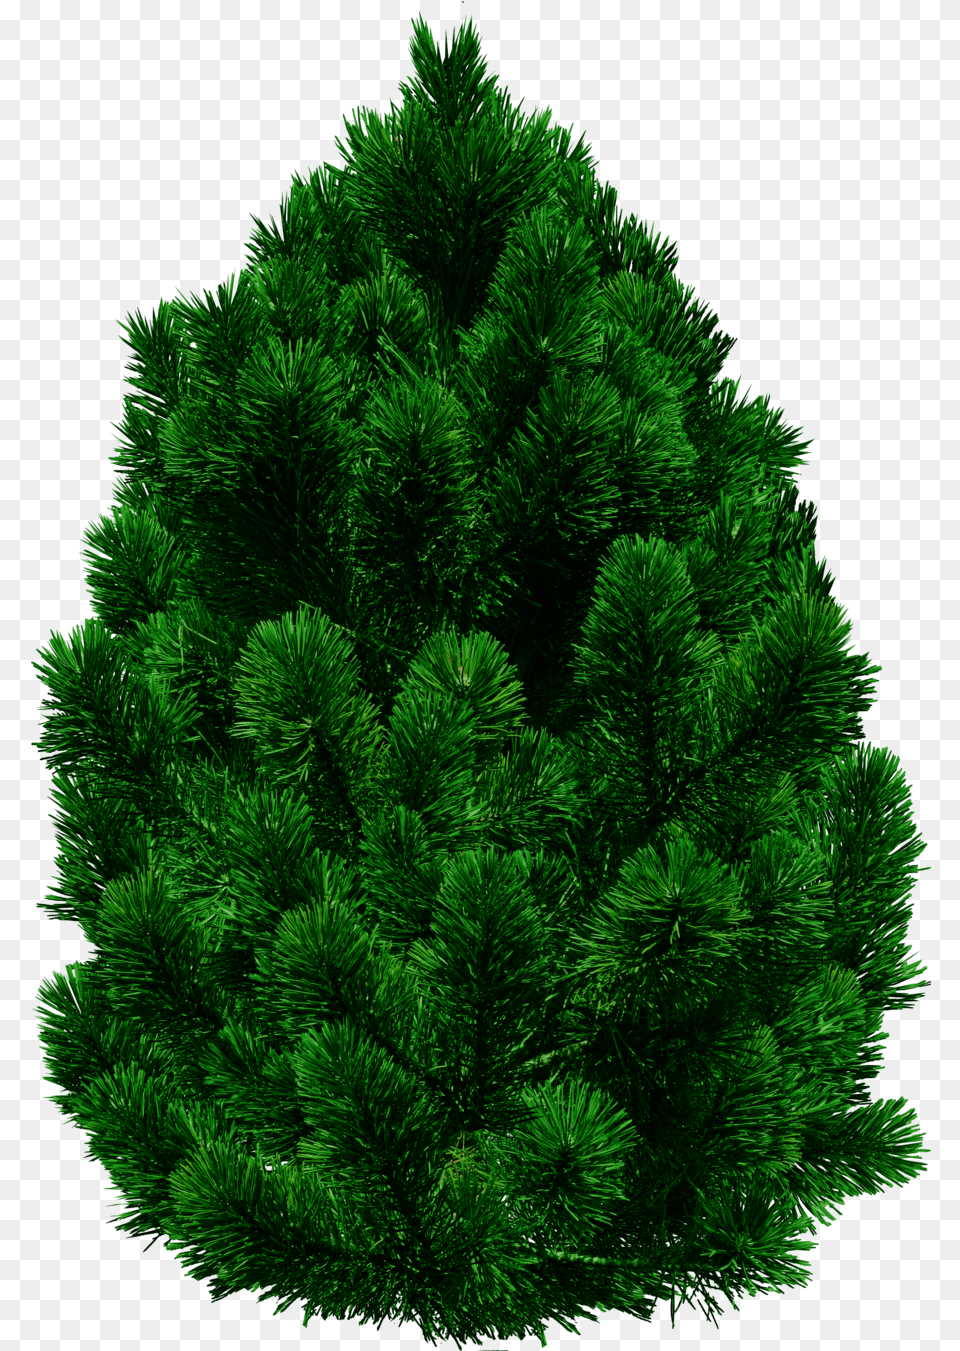 Tree Images Are To Download Tree Image In, Vegetation, Plant, Pine, Fir Free Transparent Png